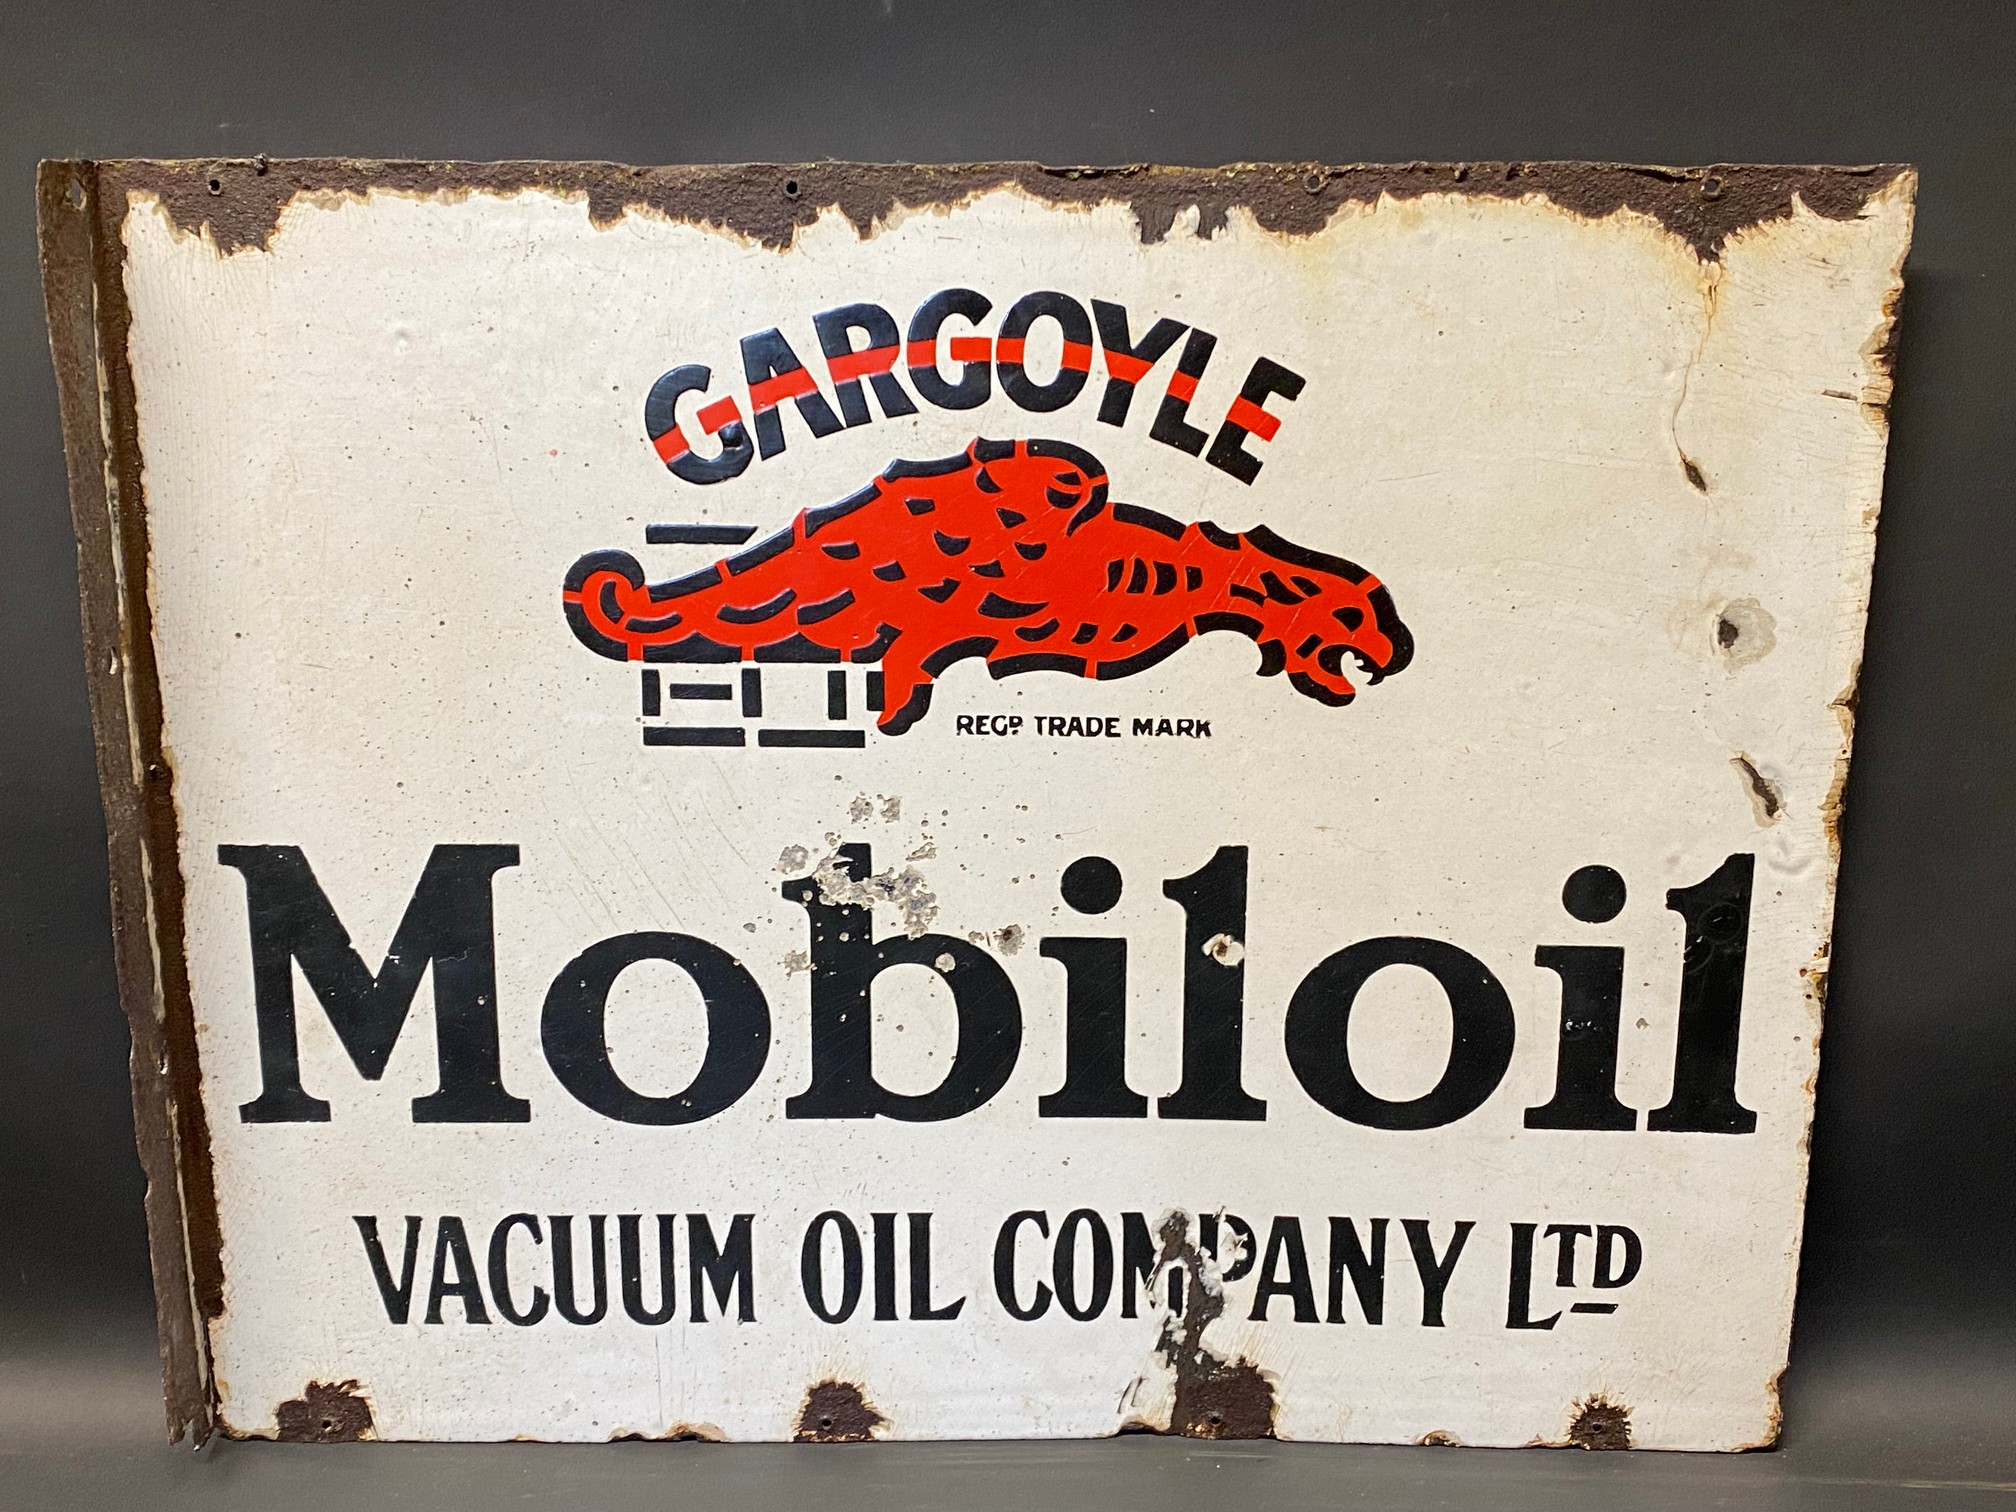 A Gargoyle Mobiloil double sided enamel sign with hanging flange, 20 x 16".